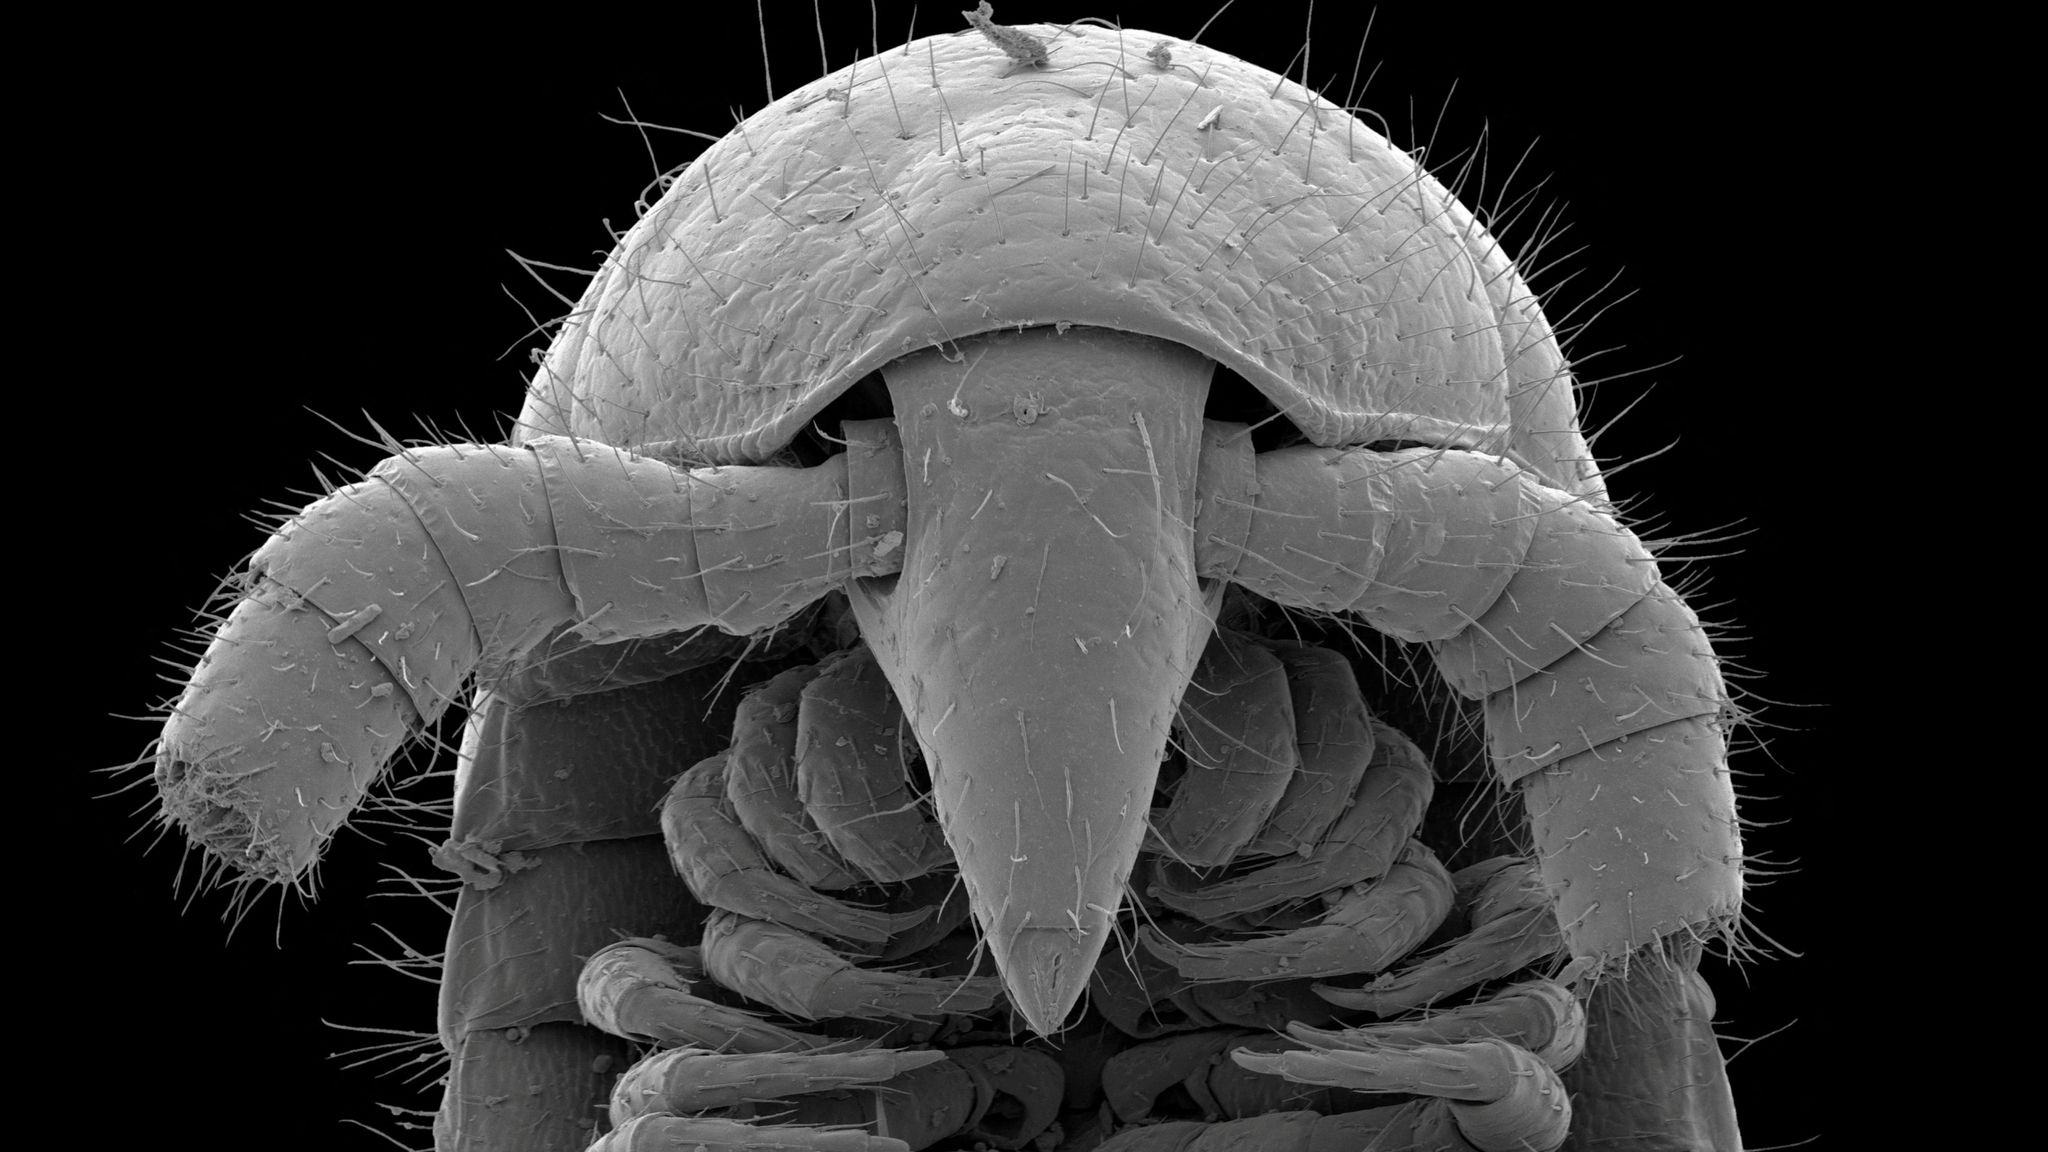 Millipede with 1,306 legs found in Australia - most of any known animal |  World News | Sky News